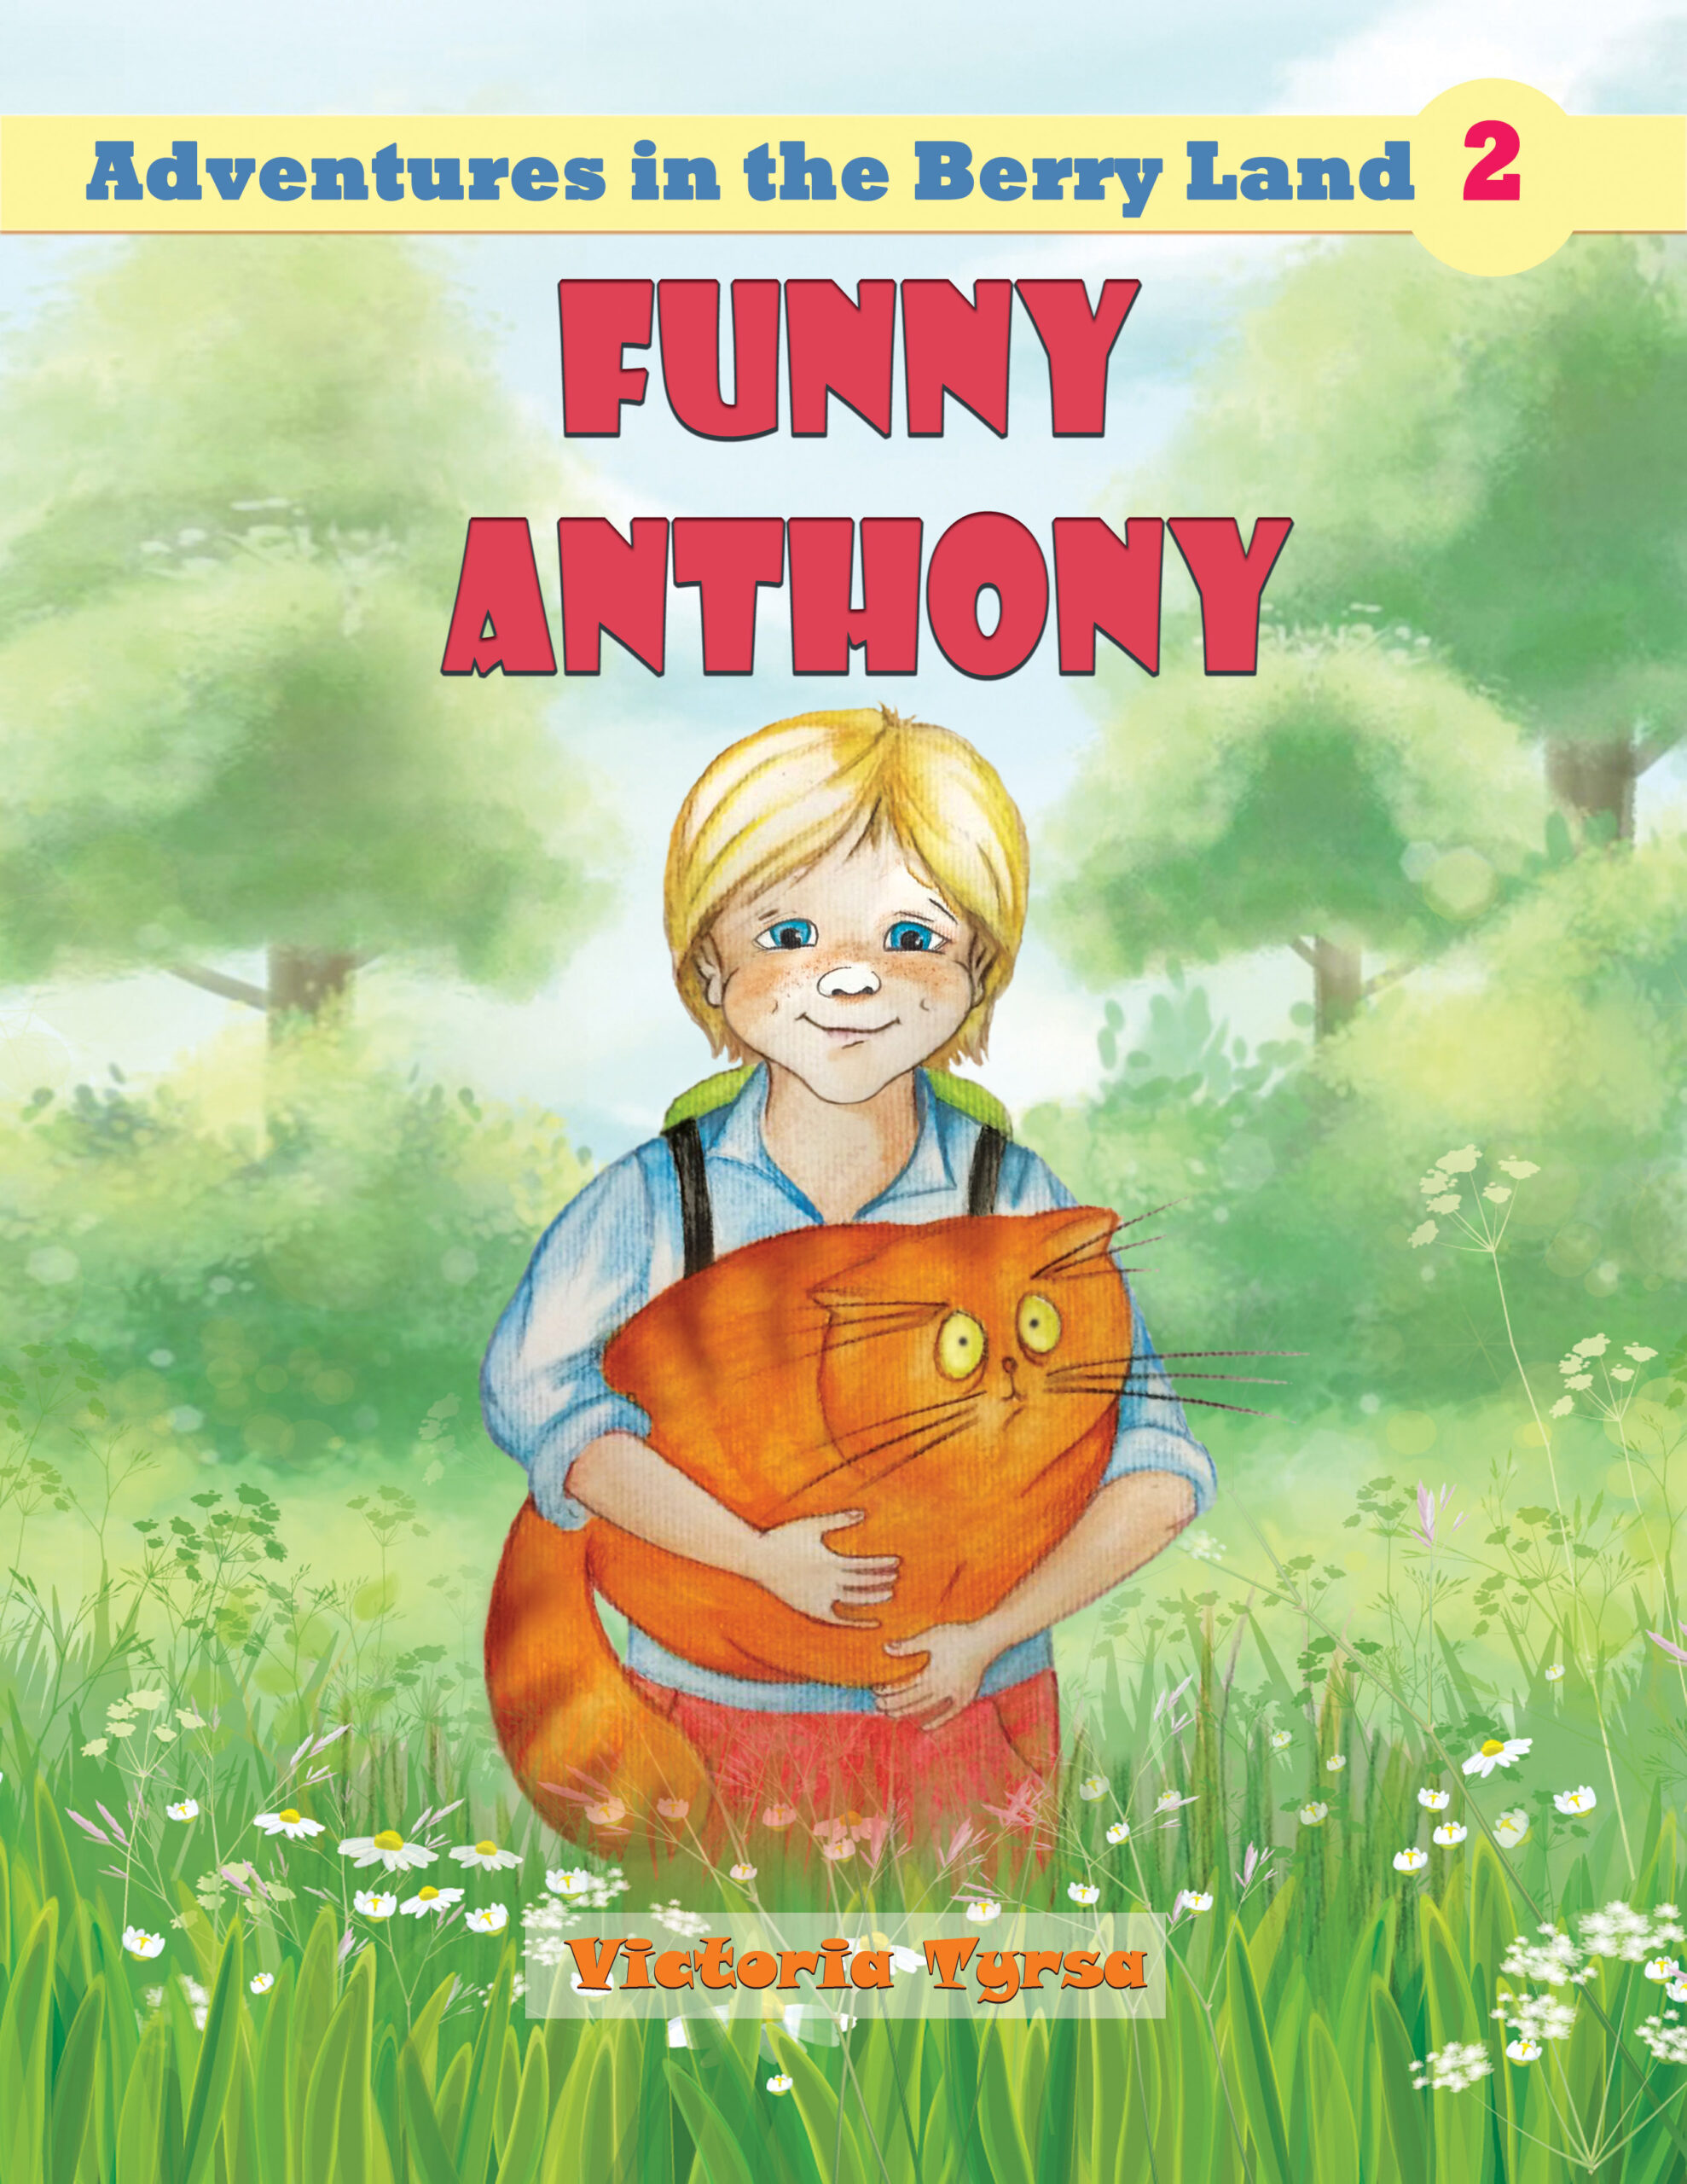 FREE: Funny Anthony (Adventures in the Berry Land Book 2) by Victoria Tyrsa